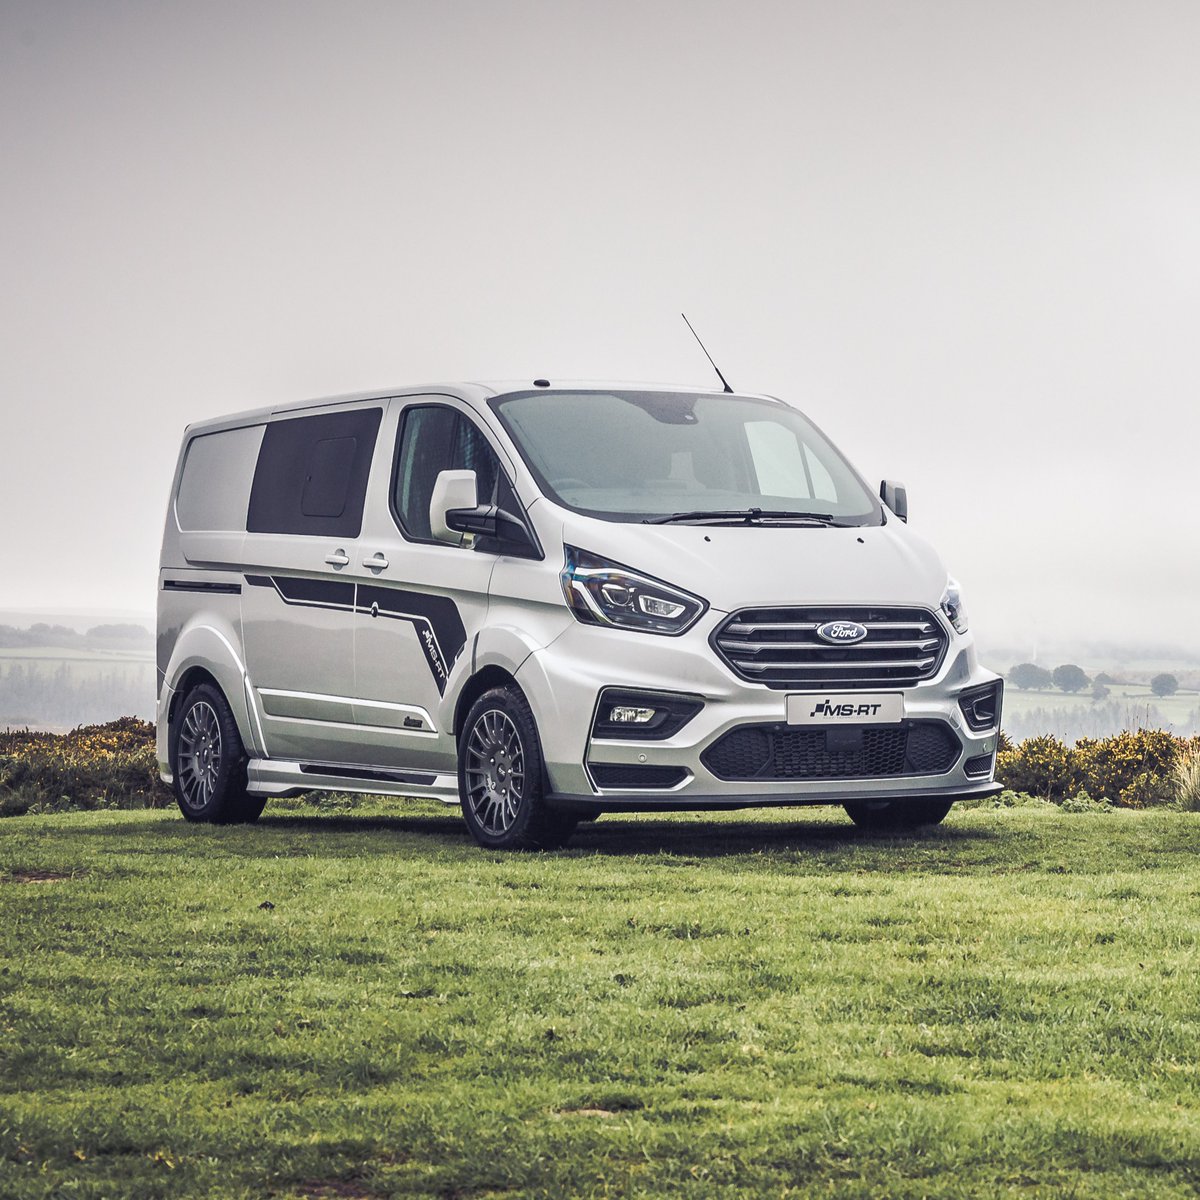 Explore all the world's corners in style. 

For more information on official MS-RT sticker packs, please get in contact with your local Ford Transit Centre or enquiries@ms-rt.com

#Transit #MSRT #StickerPacks